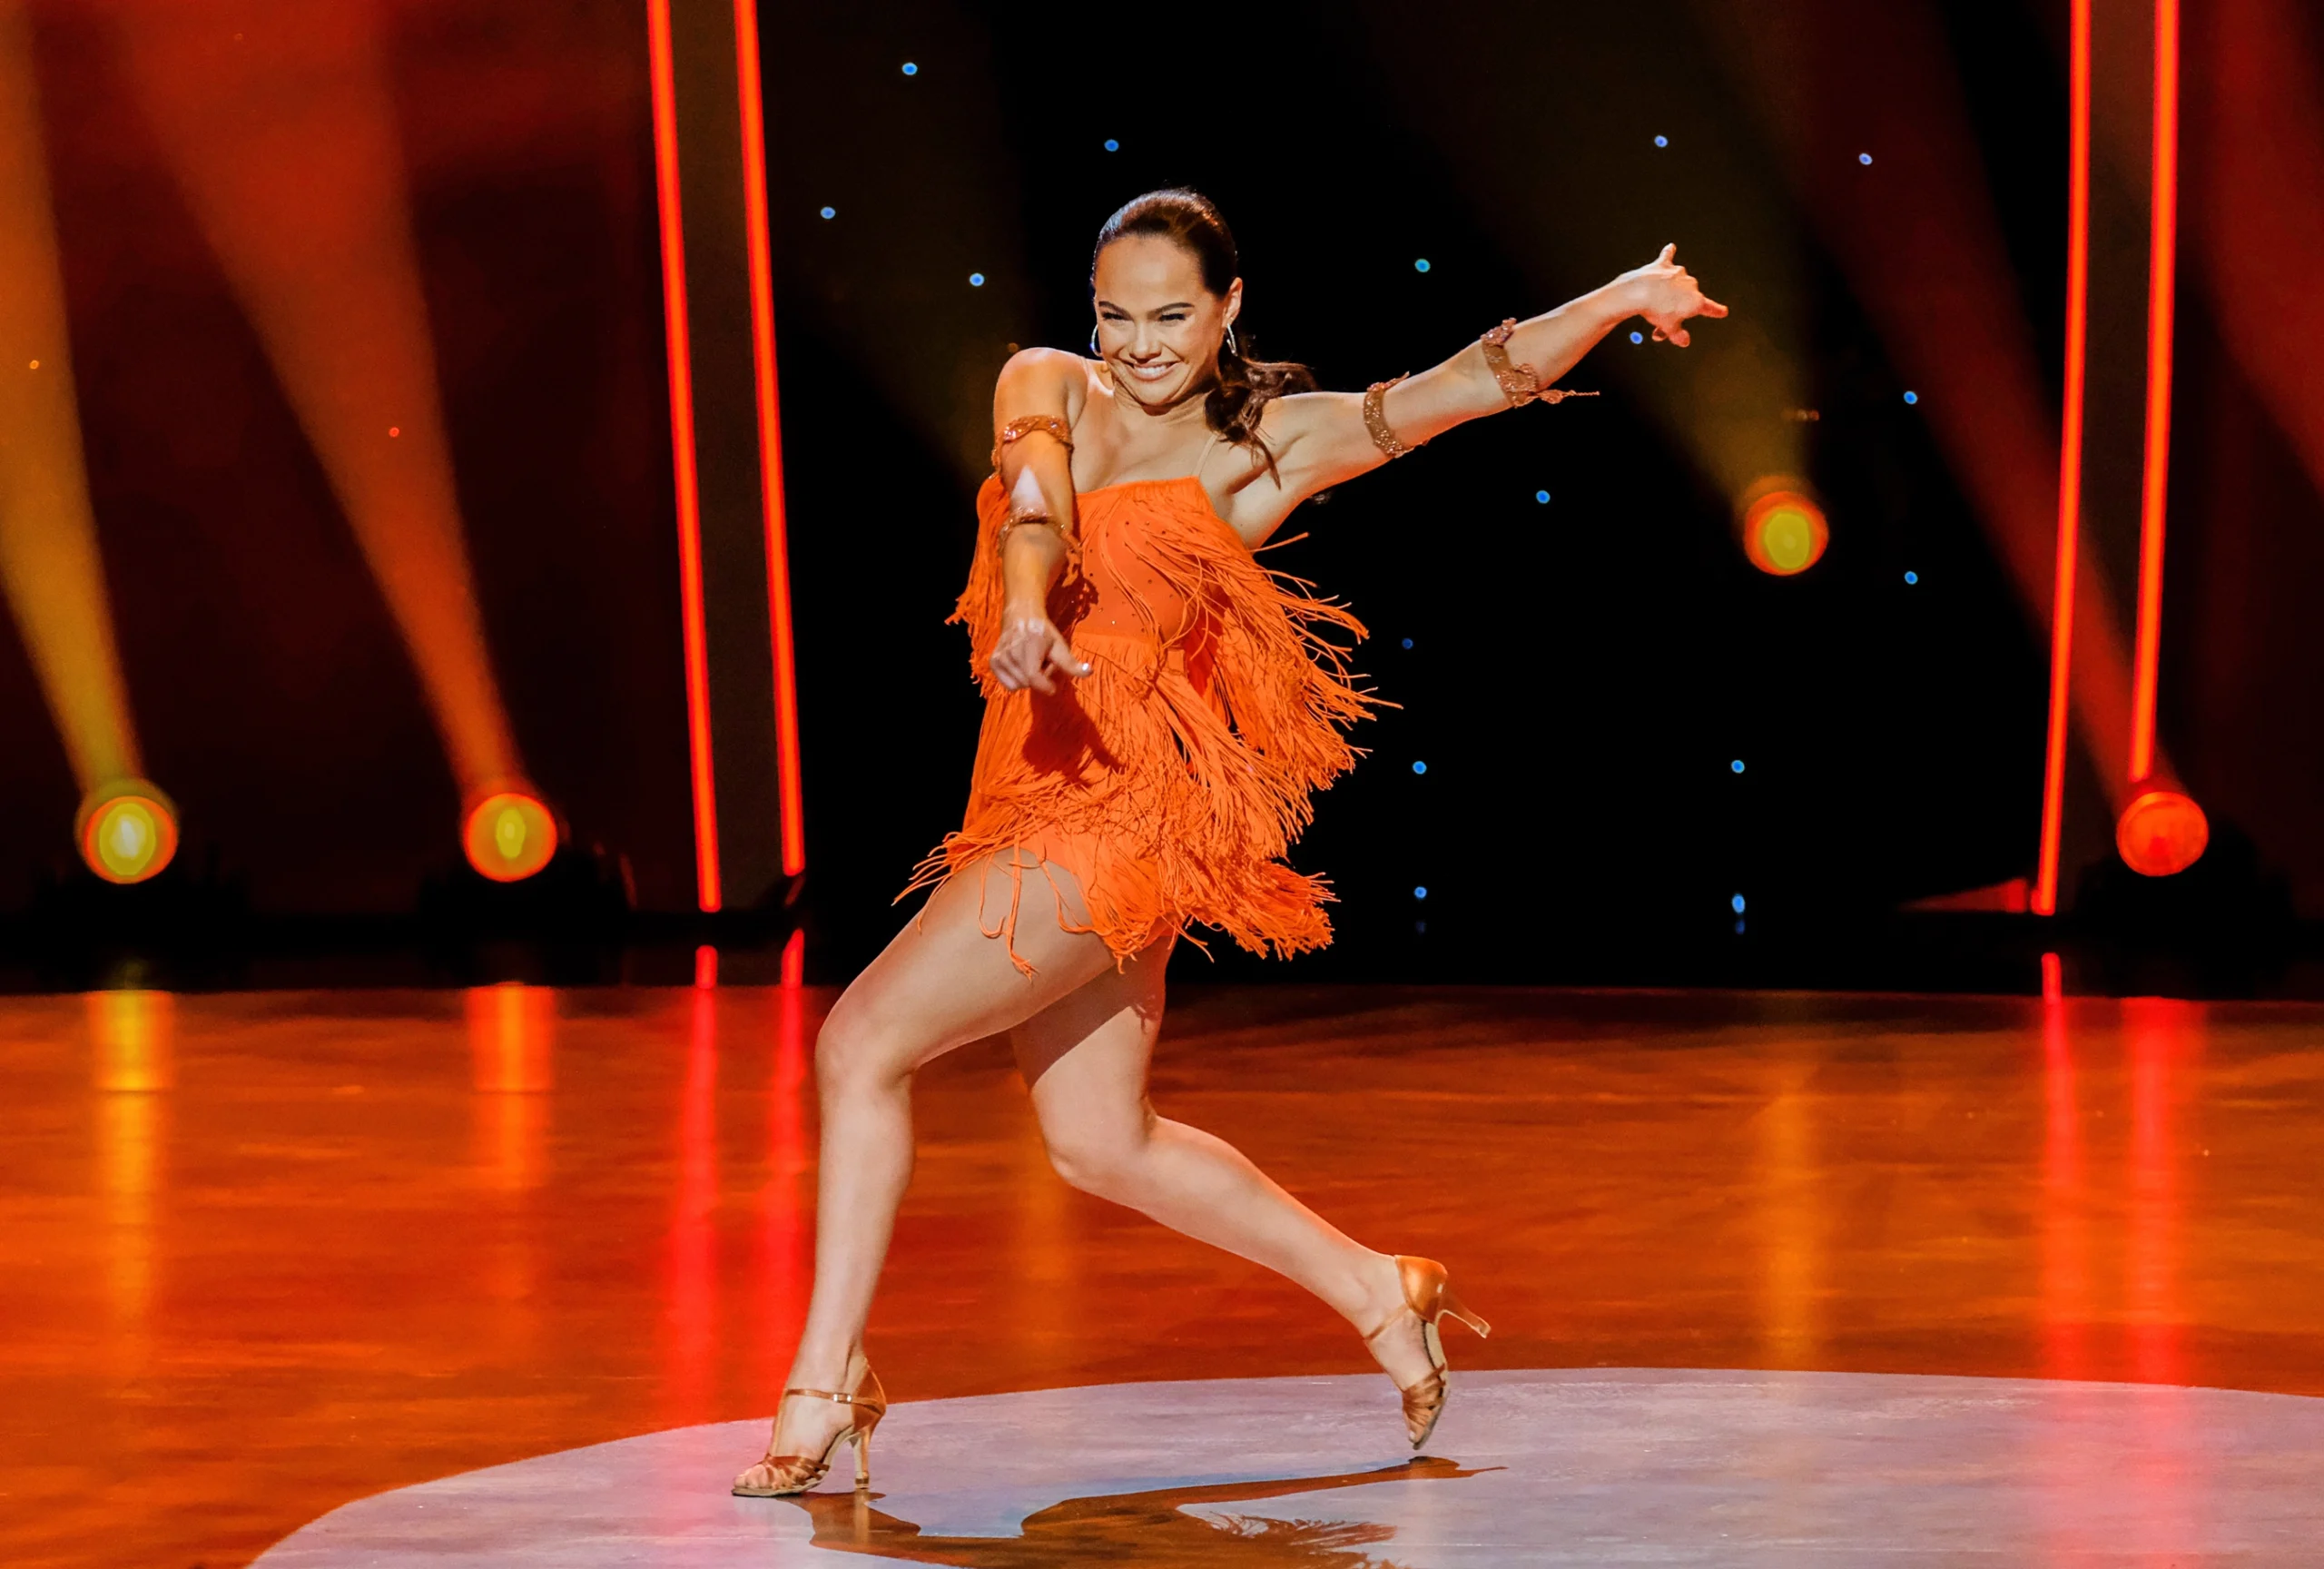 Alexis Warr performs solo on the "So You Think You Can Dance" soundstage. She wears heels and a short orange dress that moves with her.